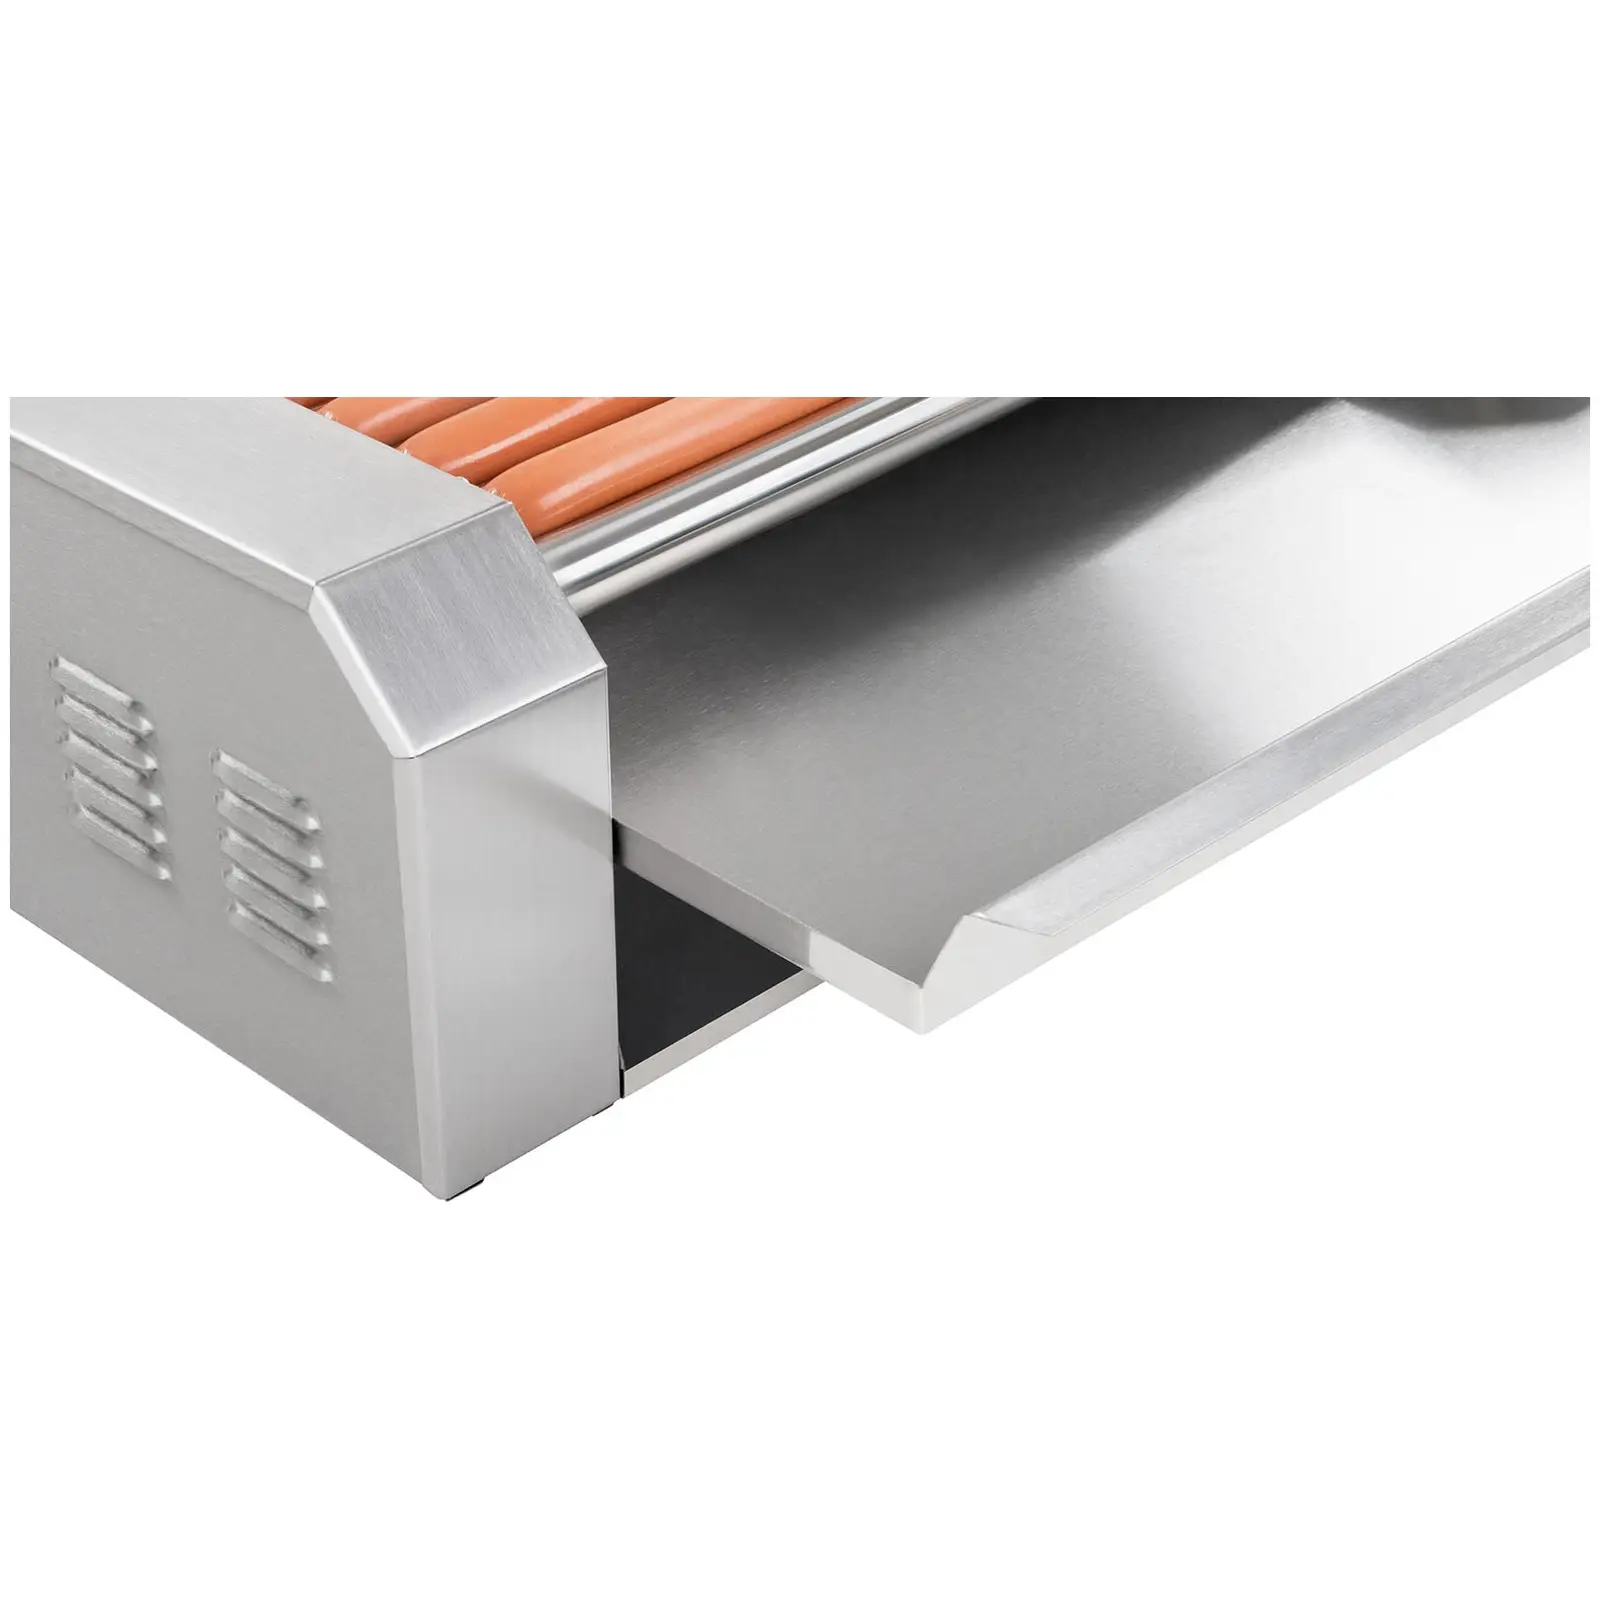 Hot Dog Grill - 5 rollers - stainless steel